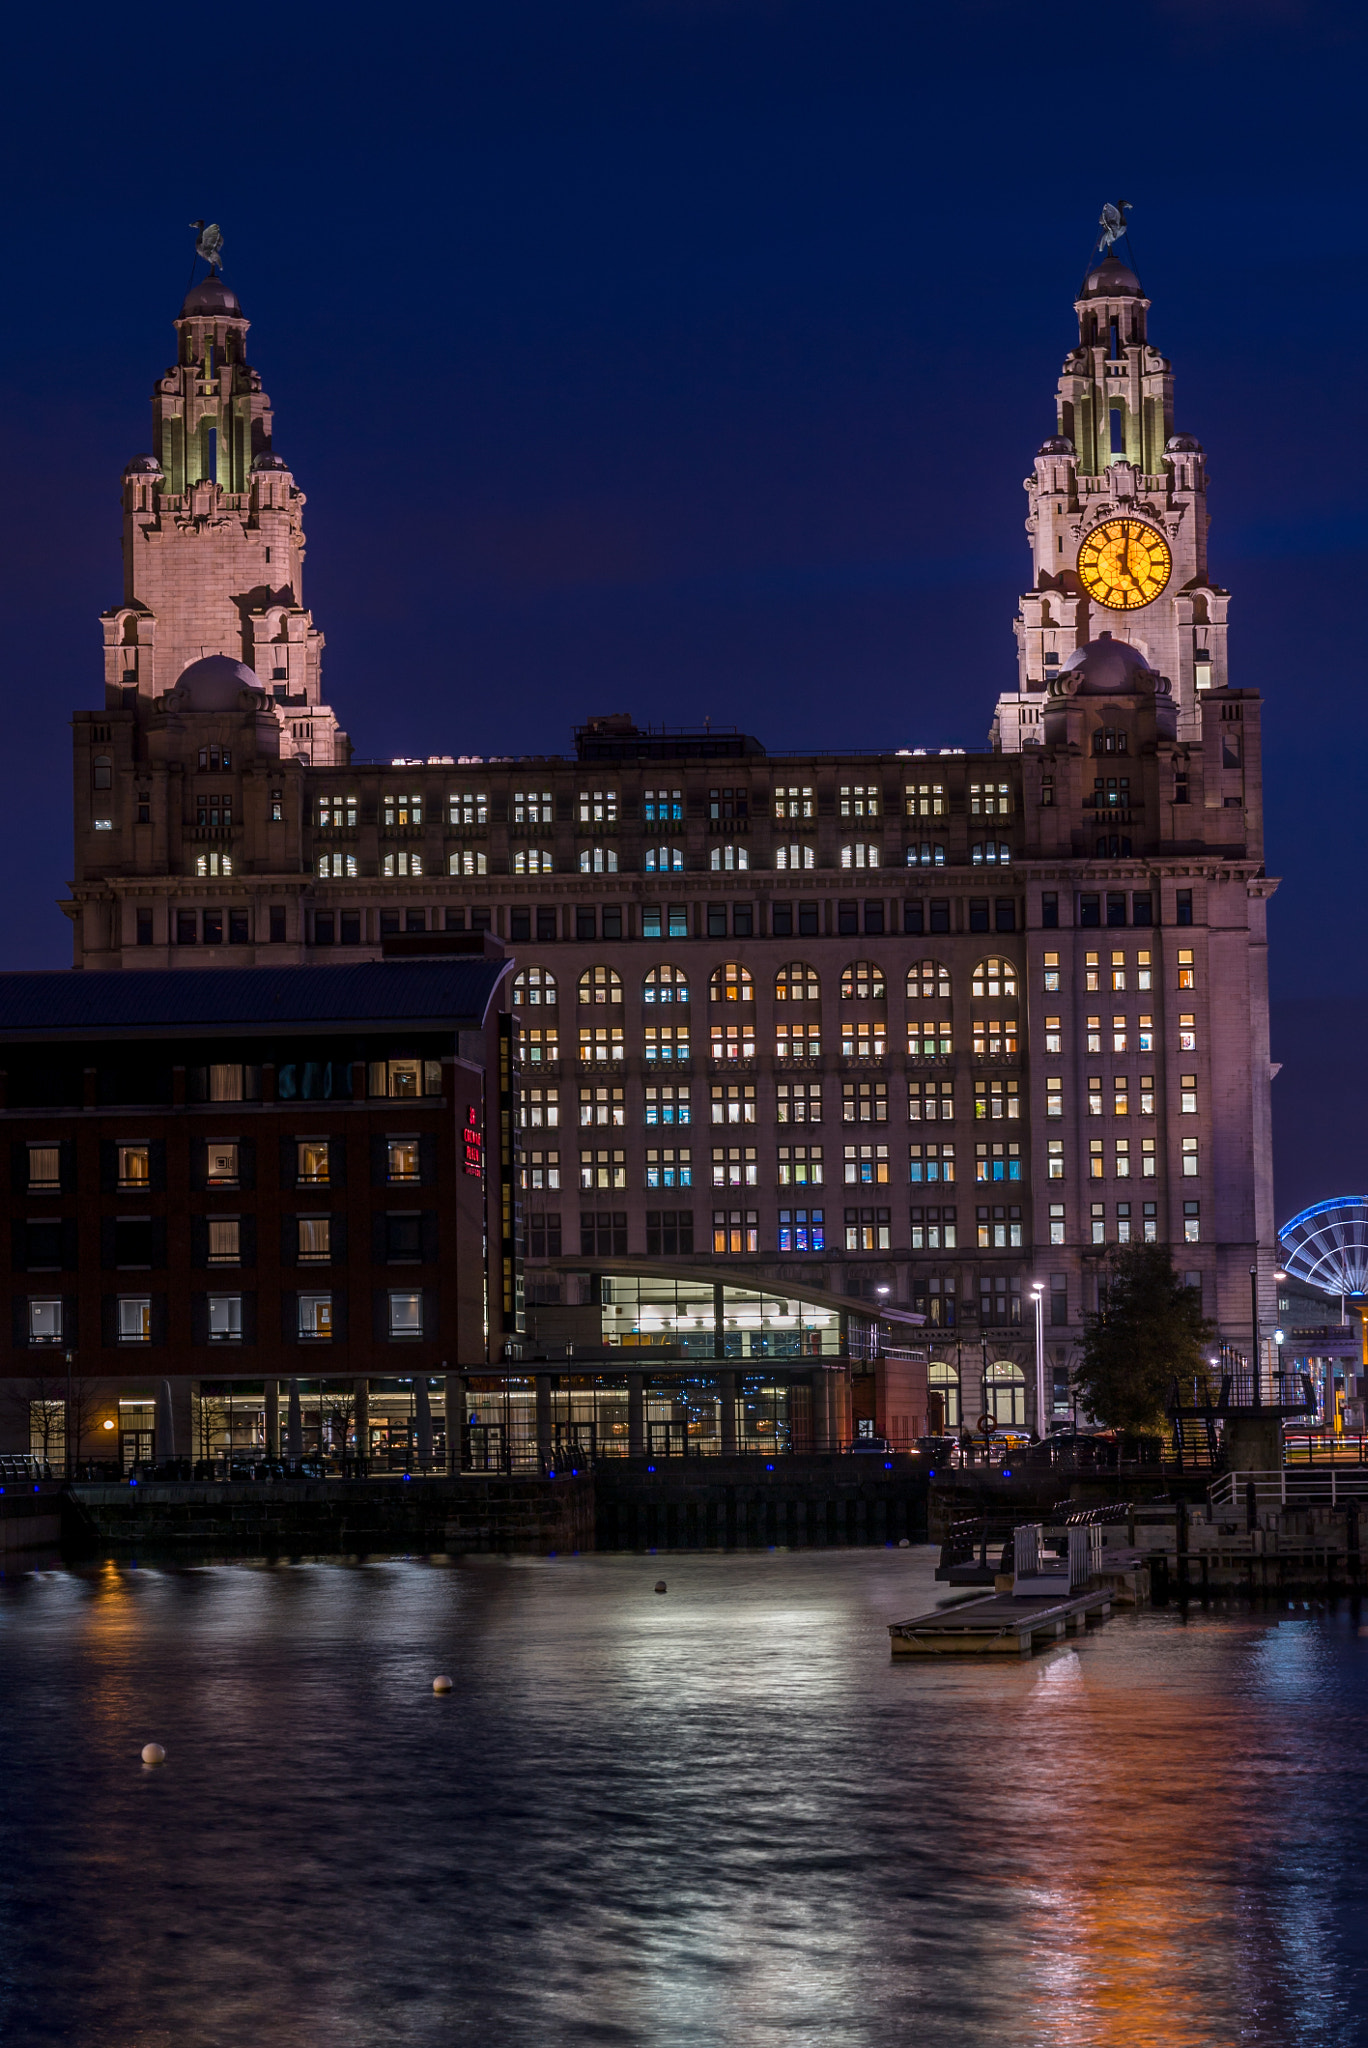 Sony a7S sample photo. Liver building photography